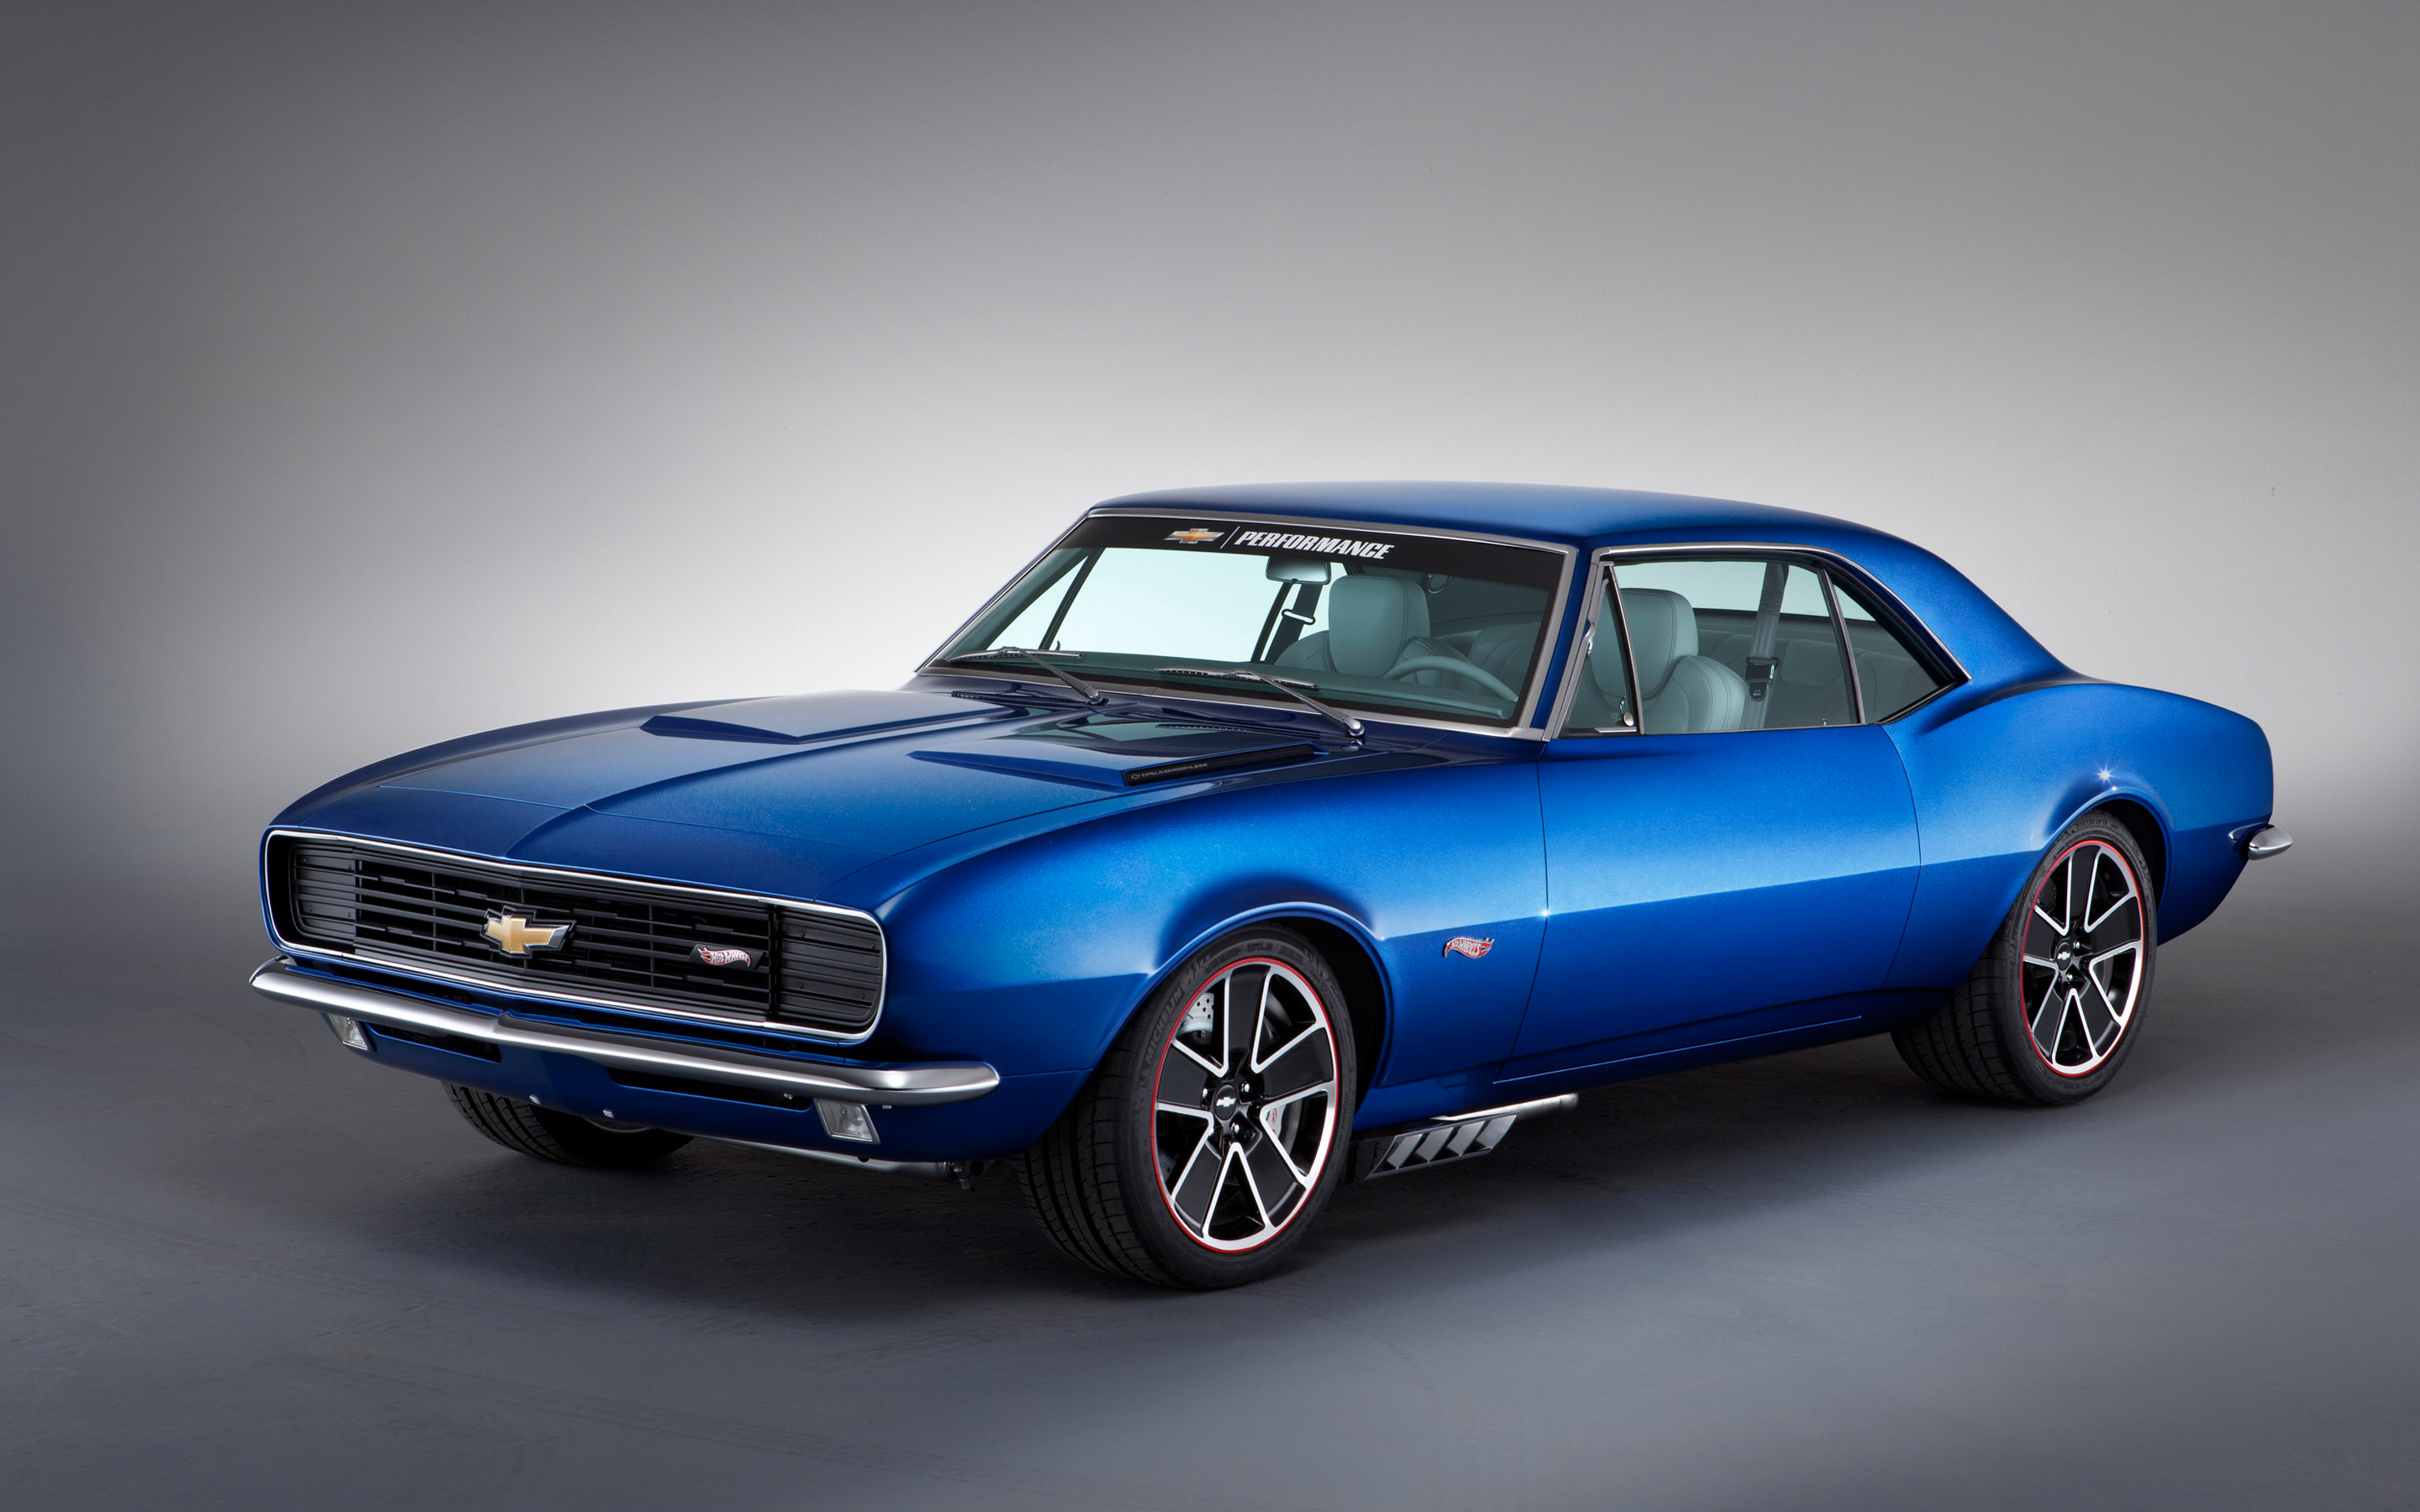 1967 Chevrolet Camaro Hot Wheels Conceptrelated Car Wallpapers Images, Photos, Reviews